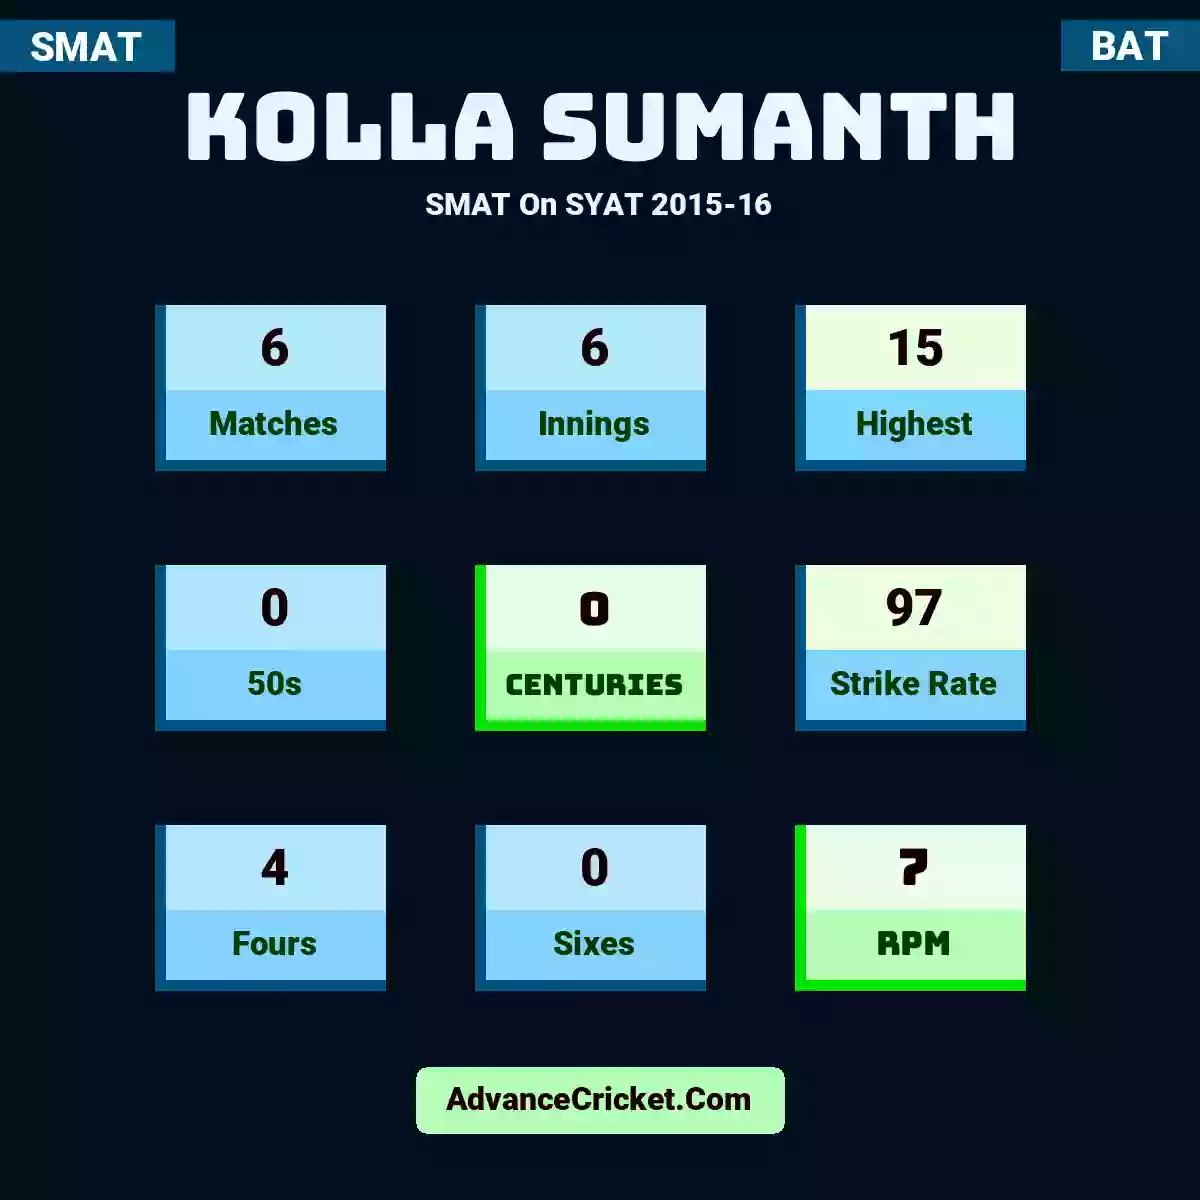 Kolla Sumanth SMAT  On SYAT 2015-16, Kolla Sumanth played 6 matches, scored 15 runs as highest, 0 half-centuries, and 0 centuries, with a strike rate of 97. K.Sumanth hit 4 fours and 0 sixes, with an RPM of 7.